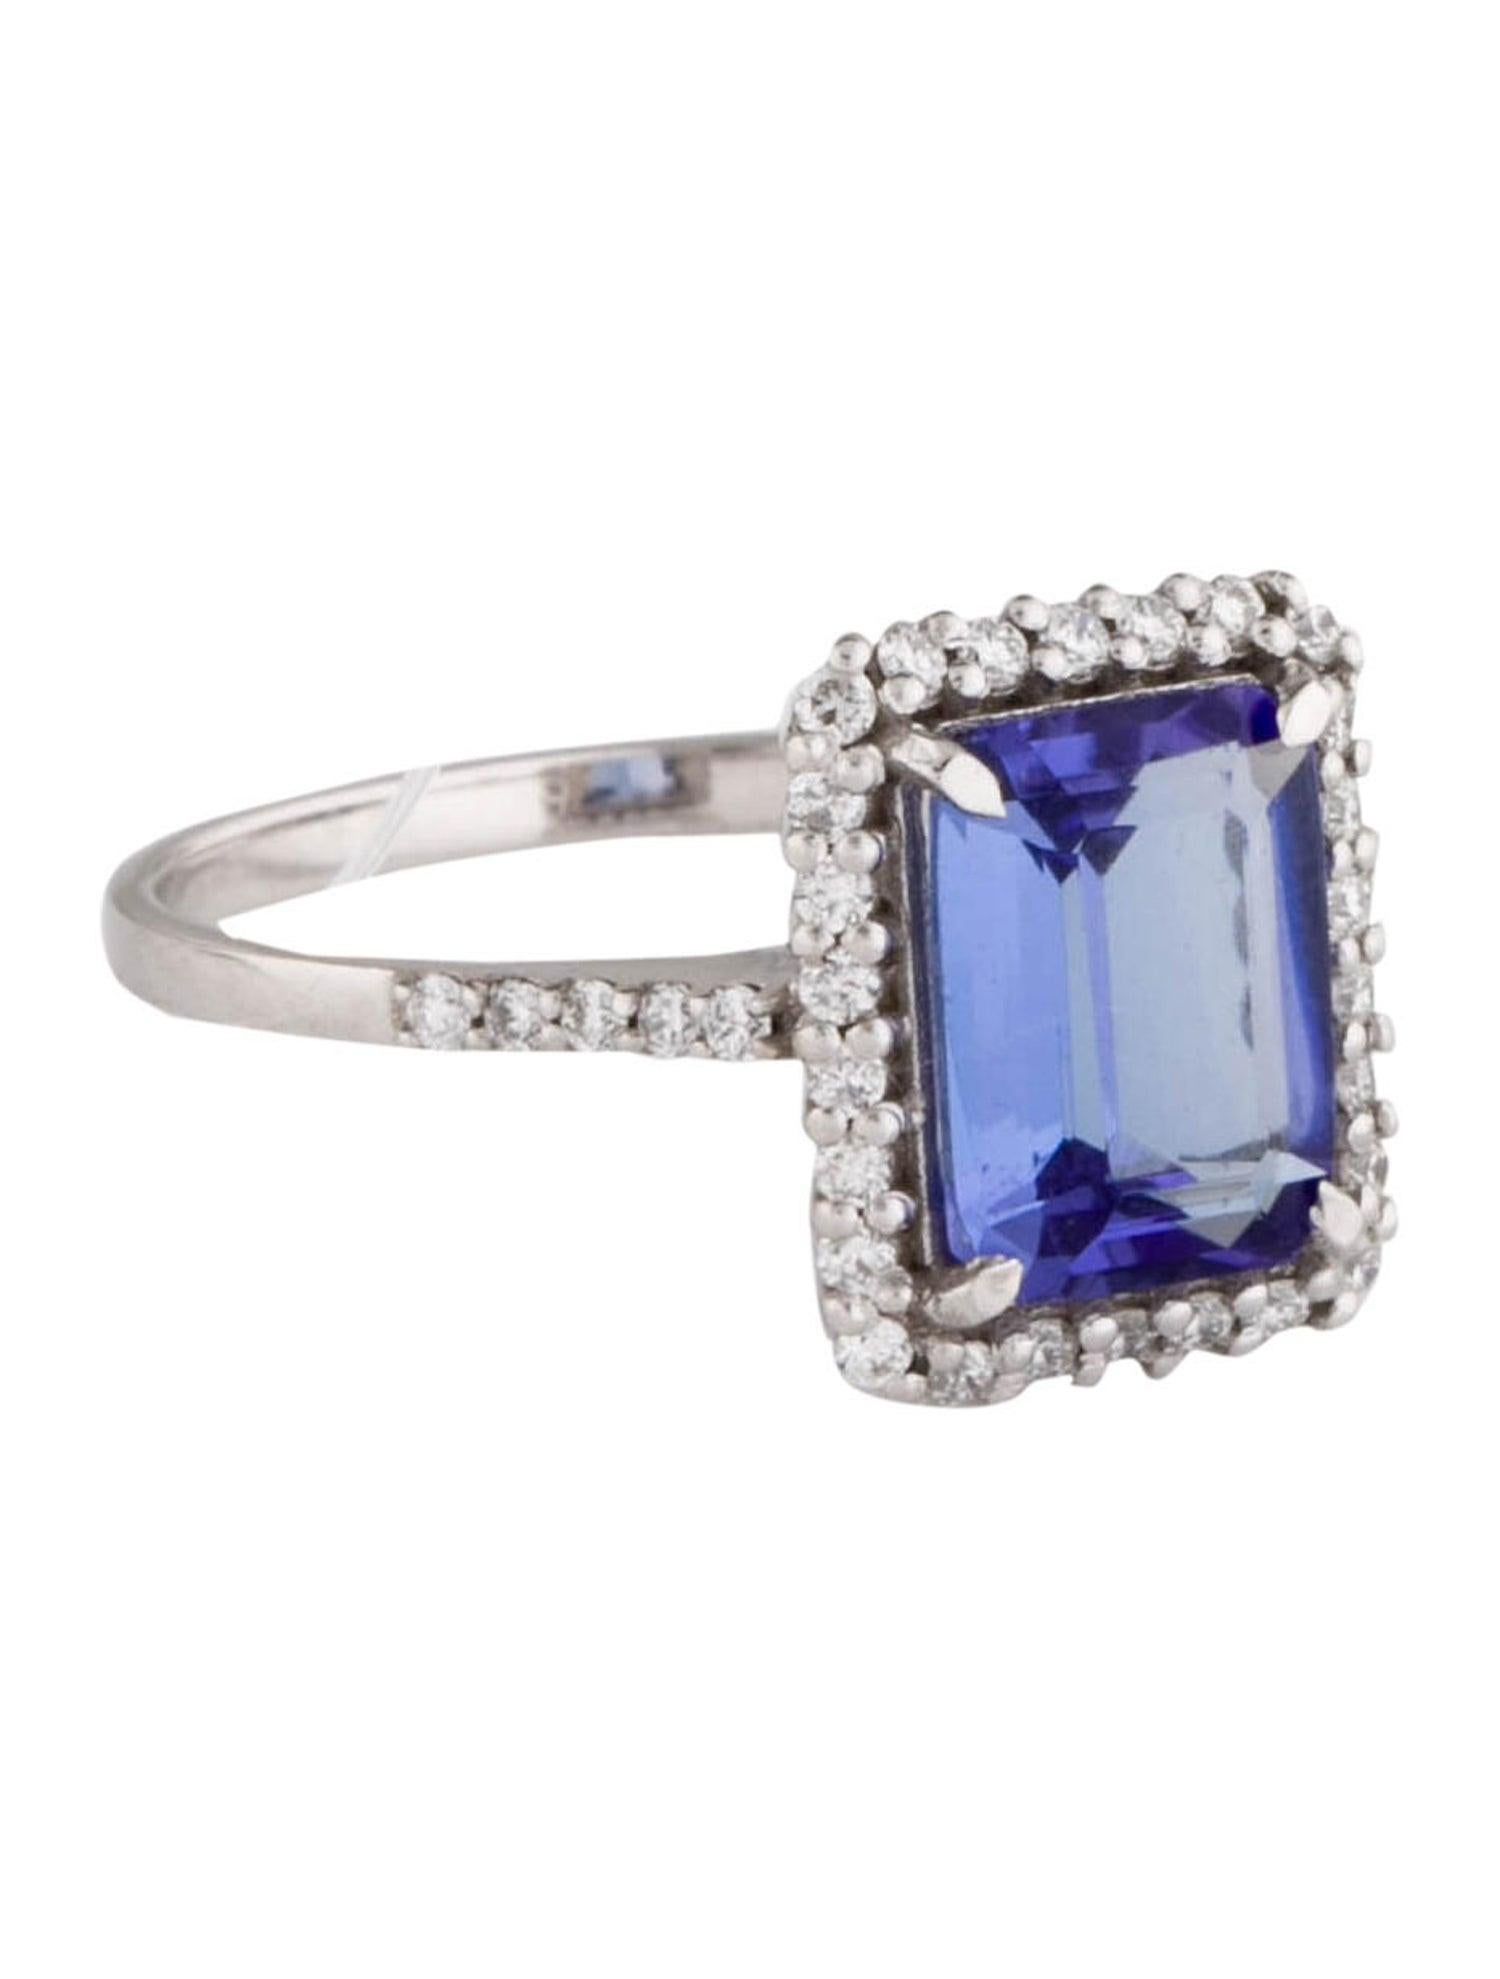 Discover the timeless elegance of our 14K White Gold Tanzanite and Diamond Cocktail Ring, a masterpiece that combines luxury with sophistication. This exquisite ring features a prominent 2.10 carat Rectangular Step Cut Tanzanite, set in